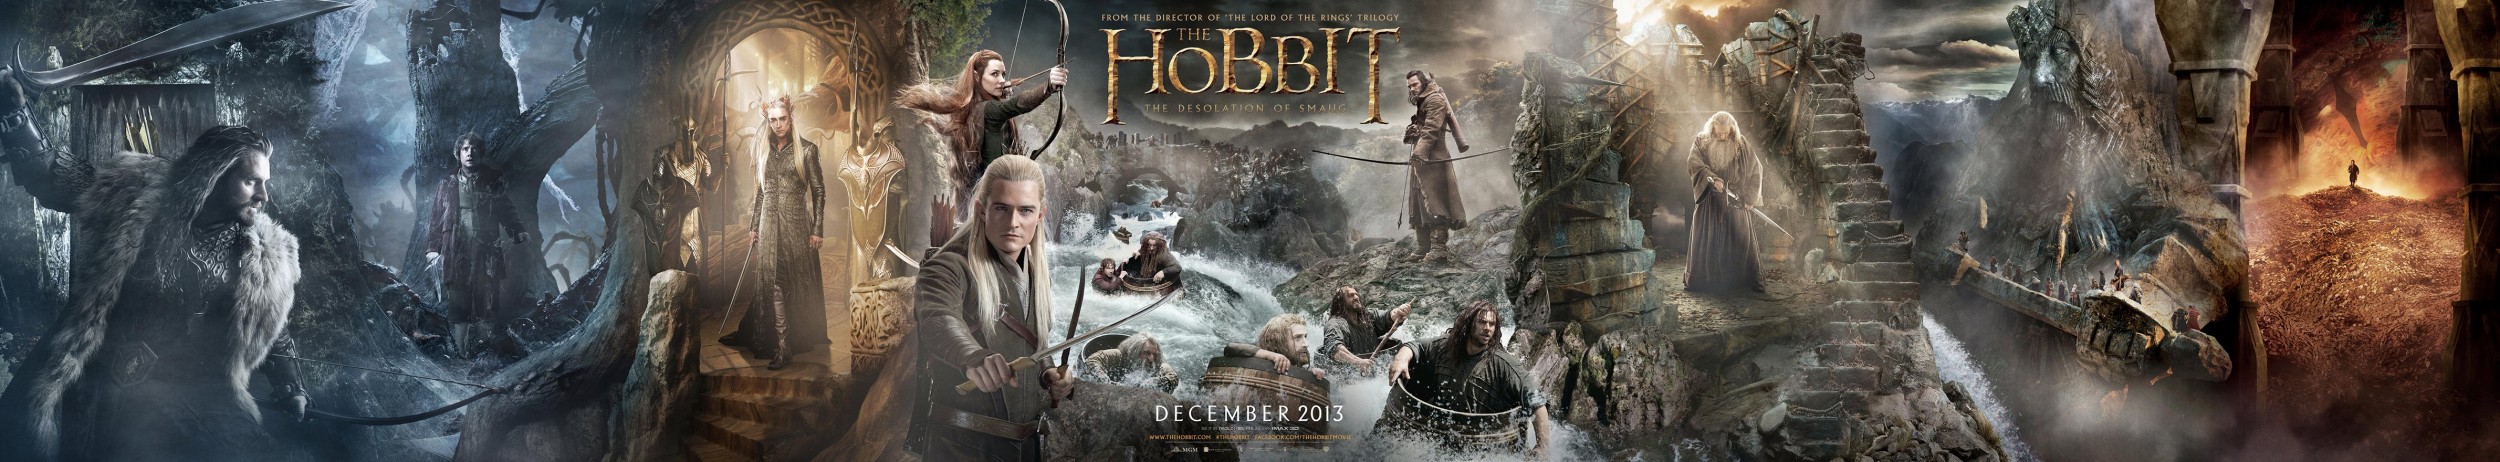 Extra Large Movie Poster Image for The Hobbit: The Desolation of Smaug (#23 of 33)